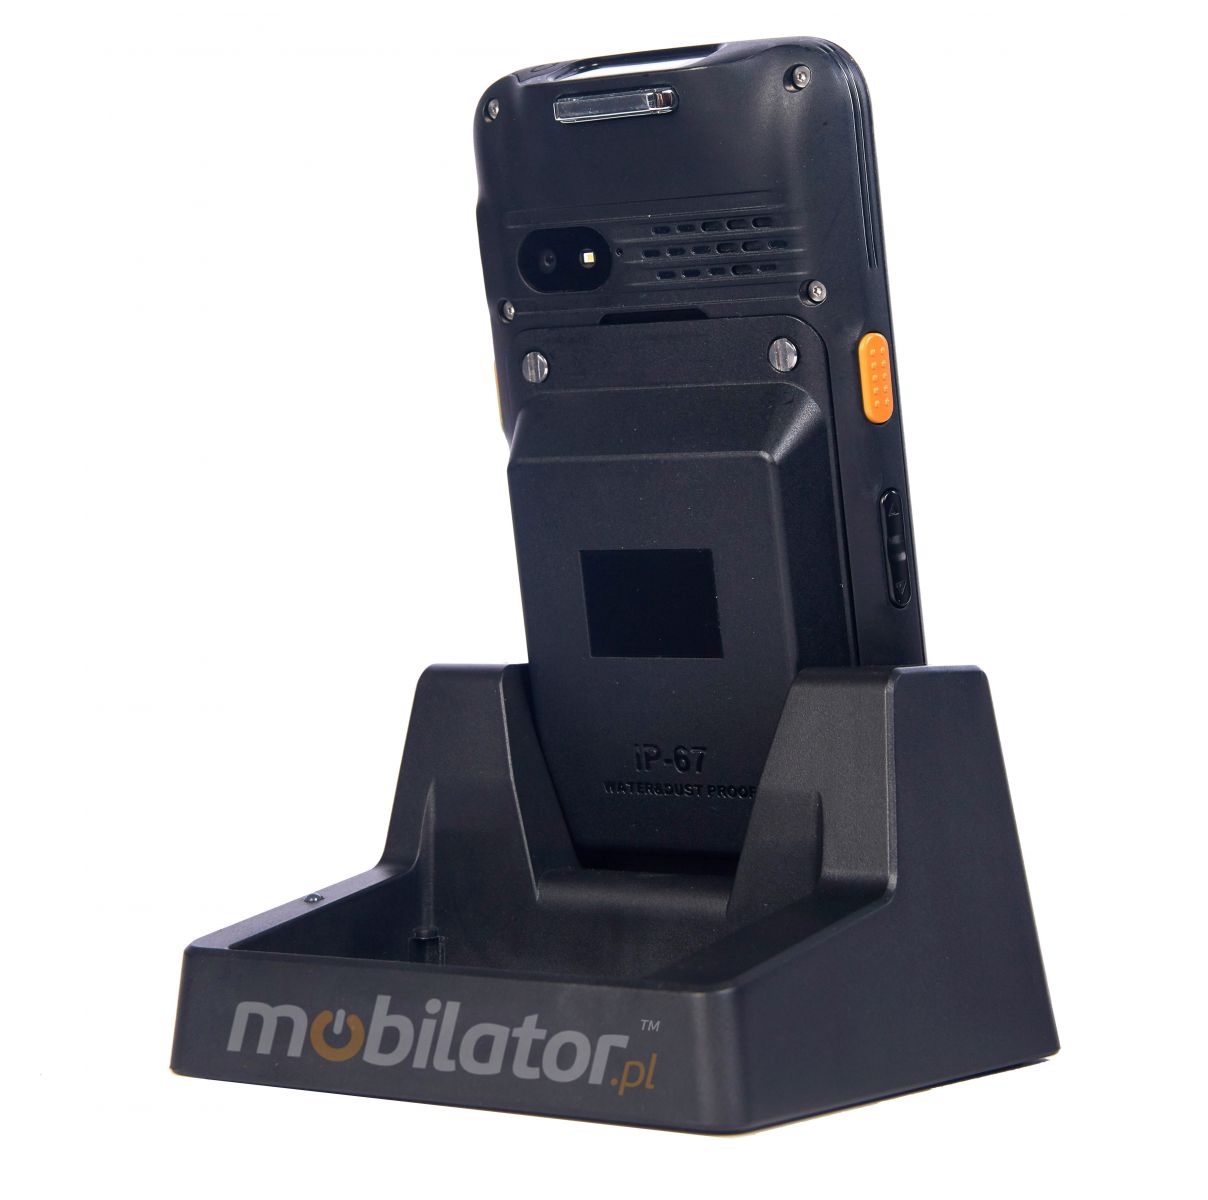 MobiPad V77 v.6 - Armored data terminal with PI67 resistance standard, extended battery, NFC technology and 2D sensor